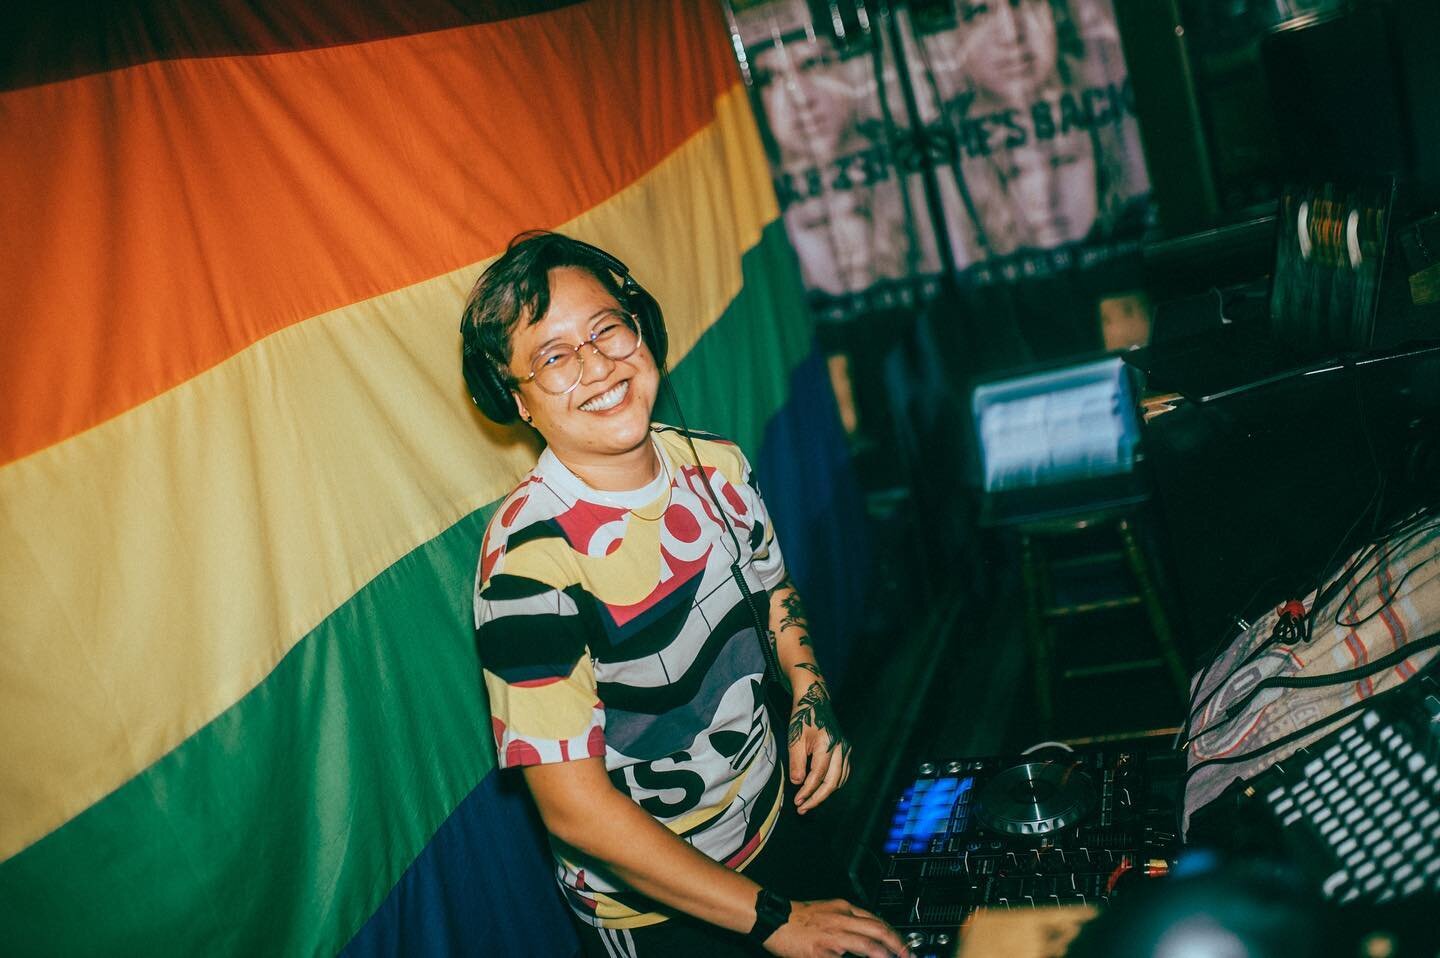 Are you missing the sick beats of DJ Bella yet, cause we are! What a wonderful night, that we were allowed to make possible by sponsors like @100.1truenorthfm! Thank you for getting the word out about our events! #ykpride2022
Photography by: @vince.r